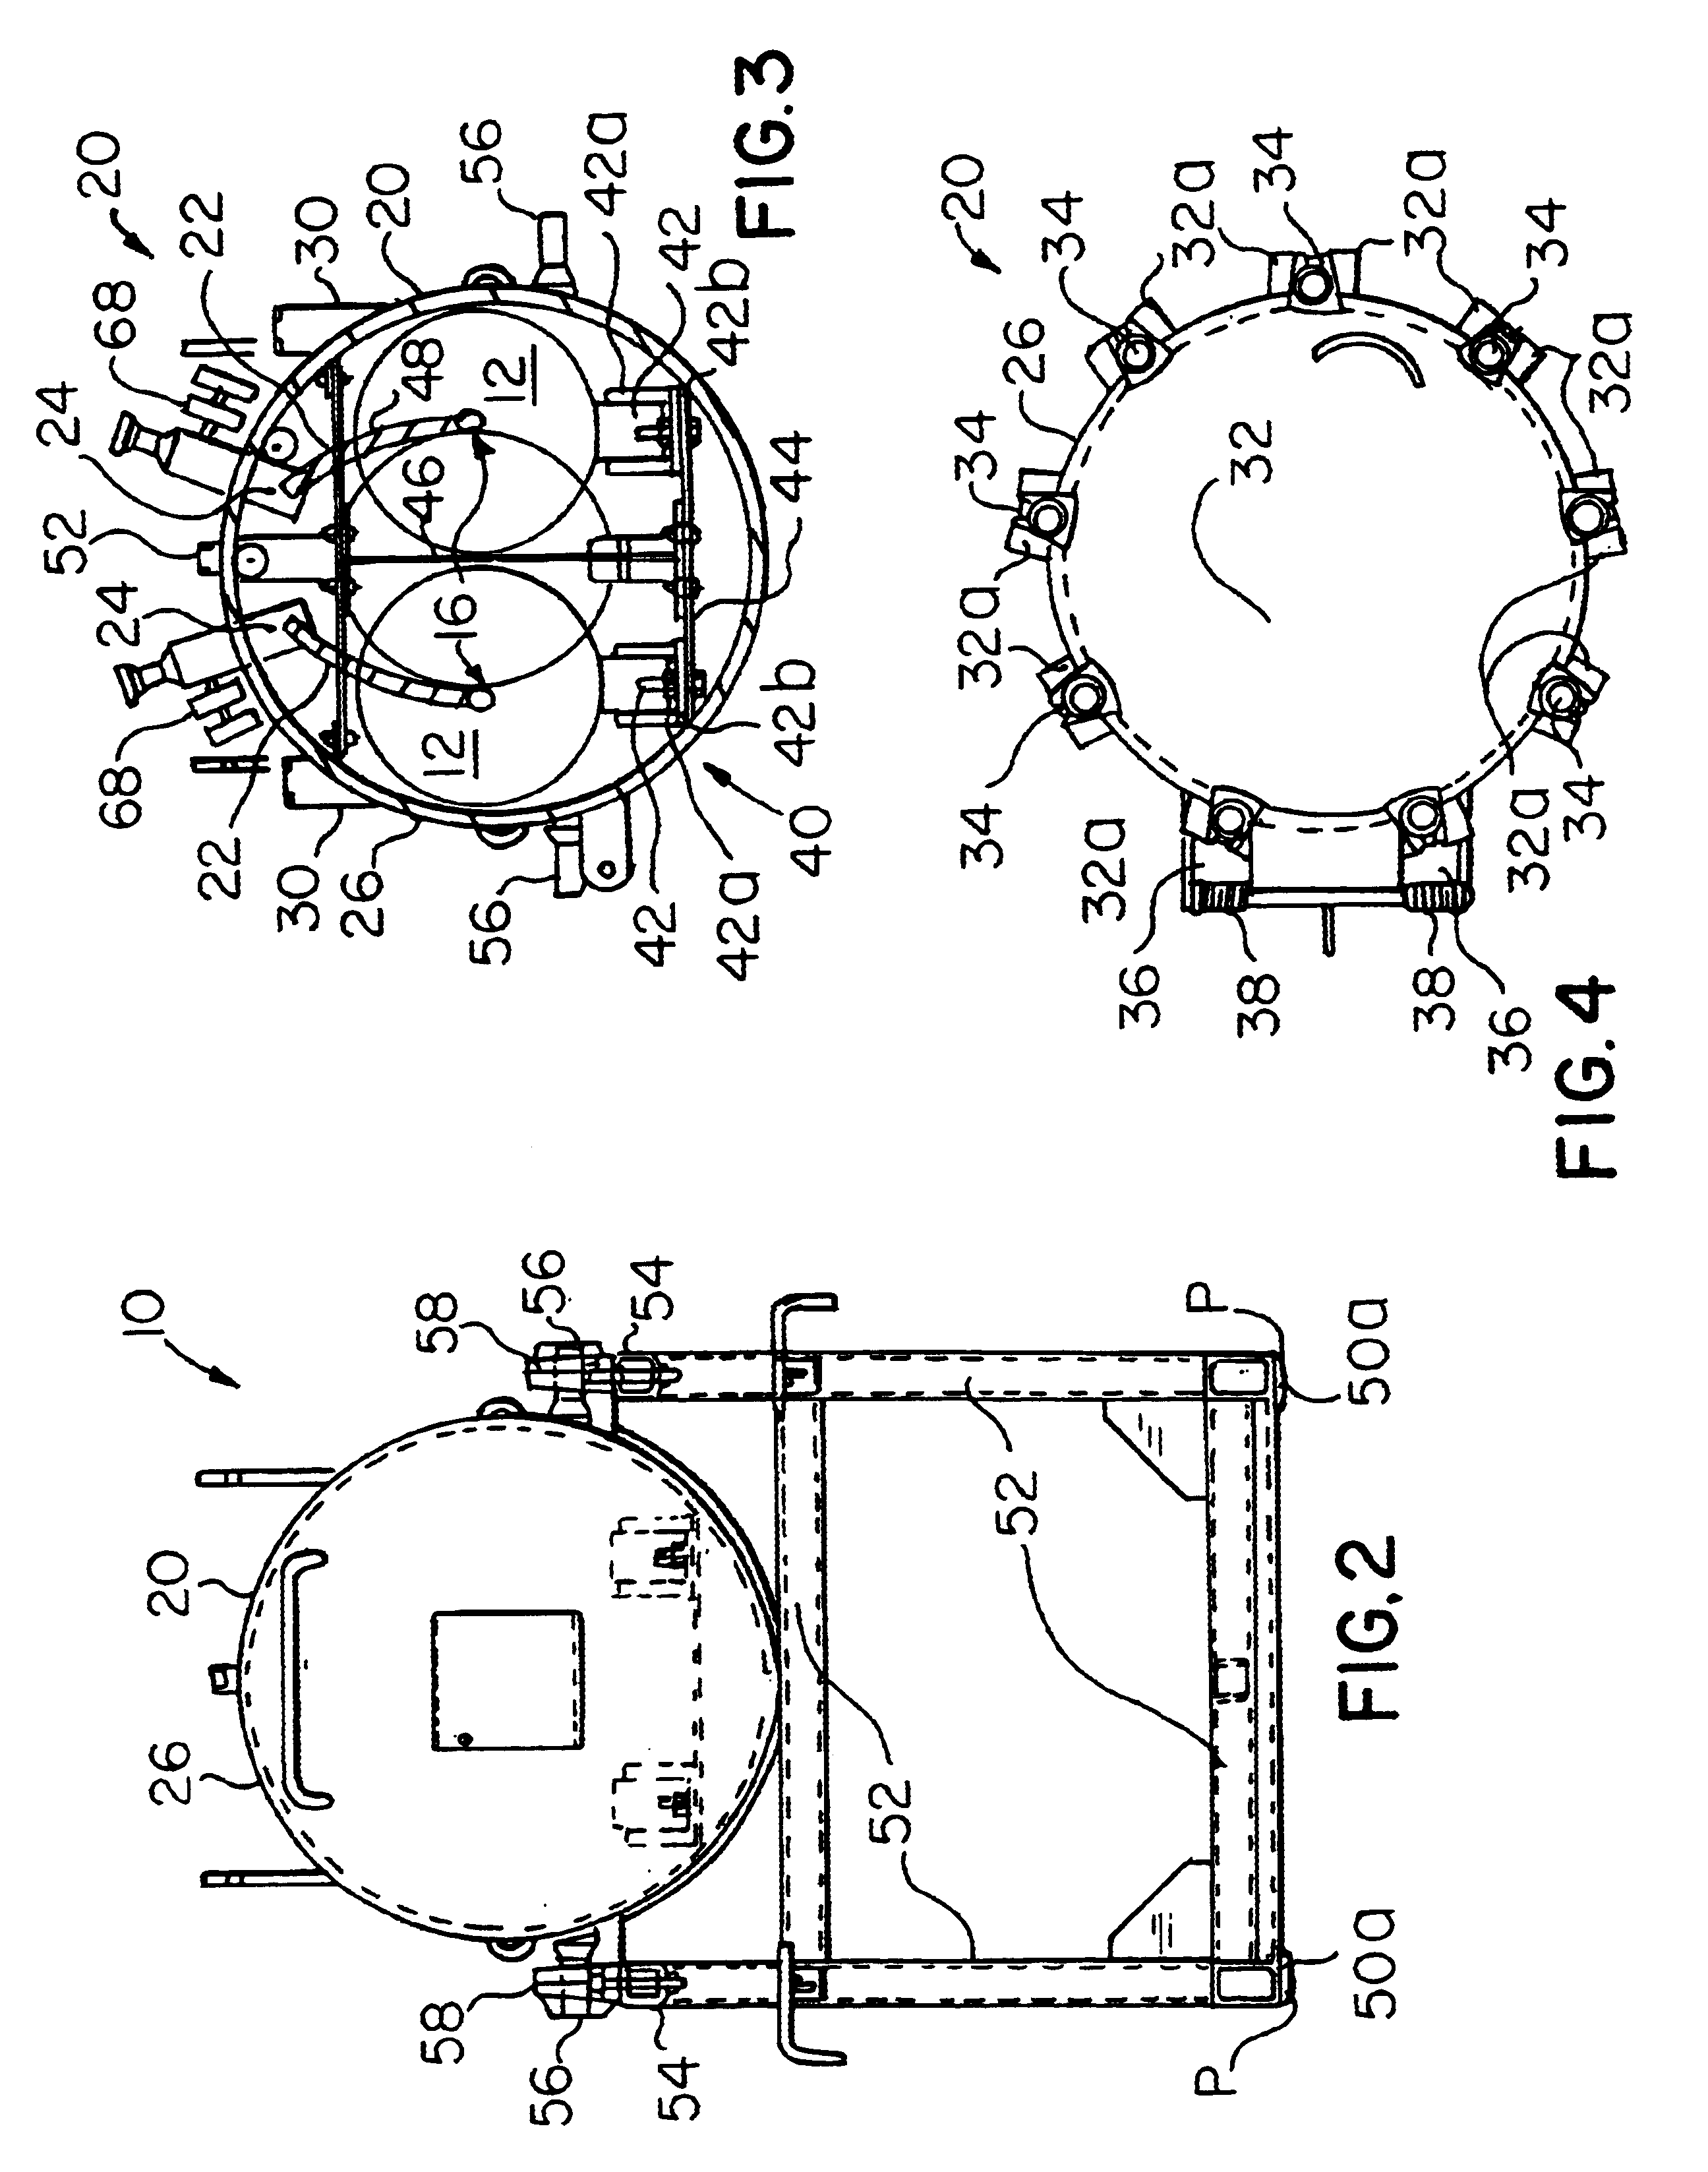 Apparatus for safely containing and delivering hazardous fluid substances from at least two supply cylinders